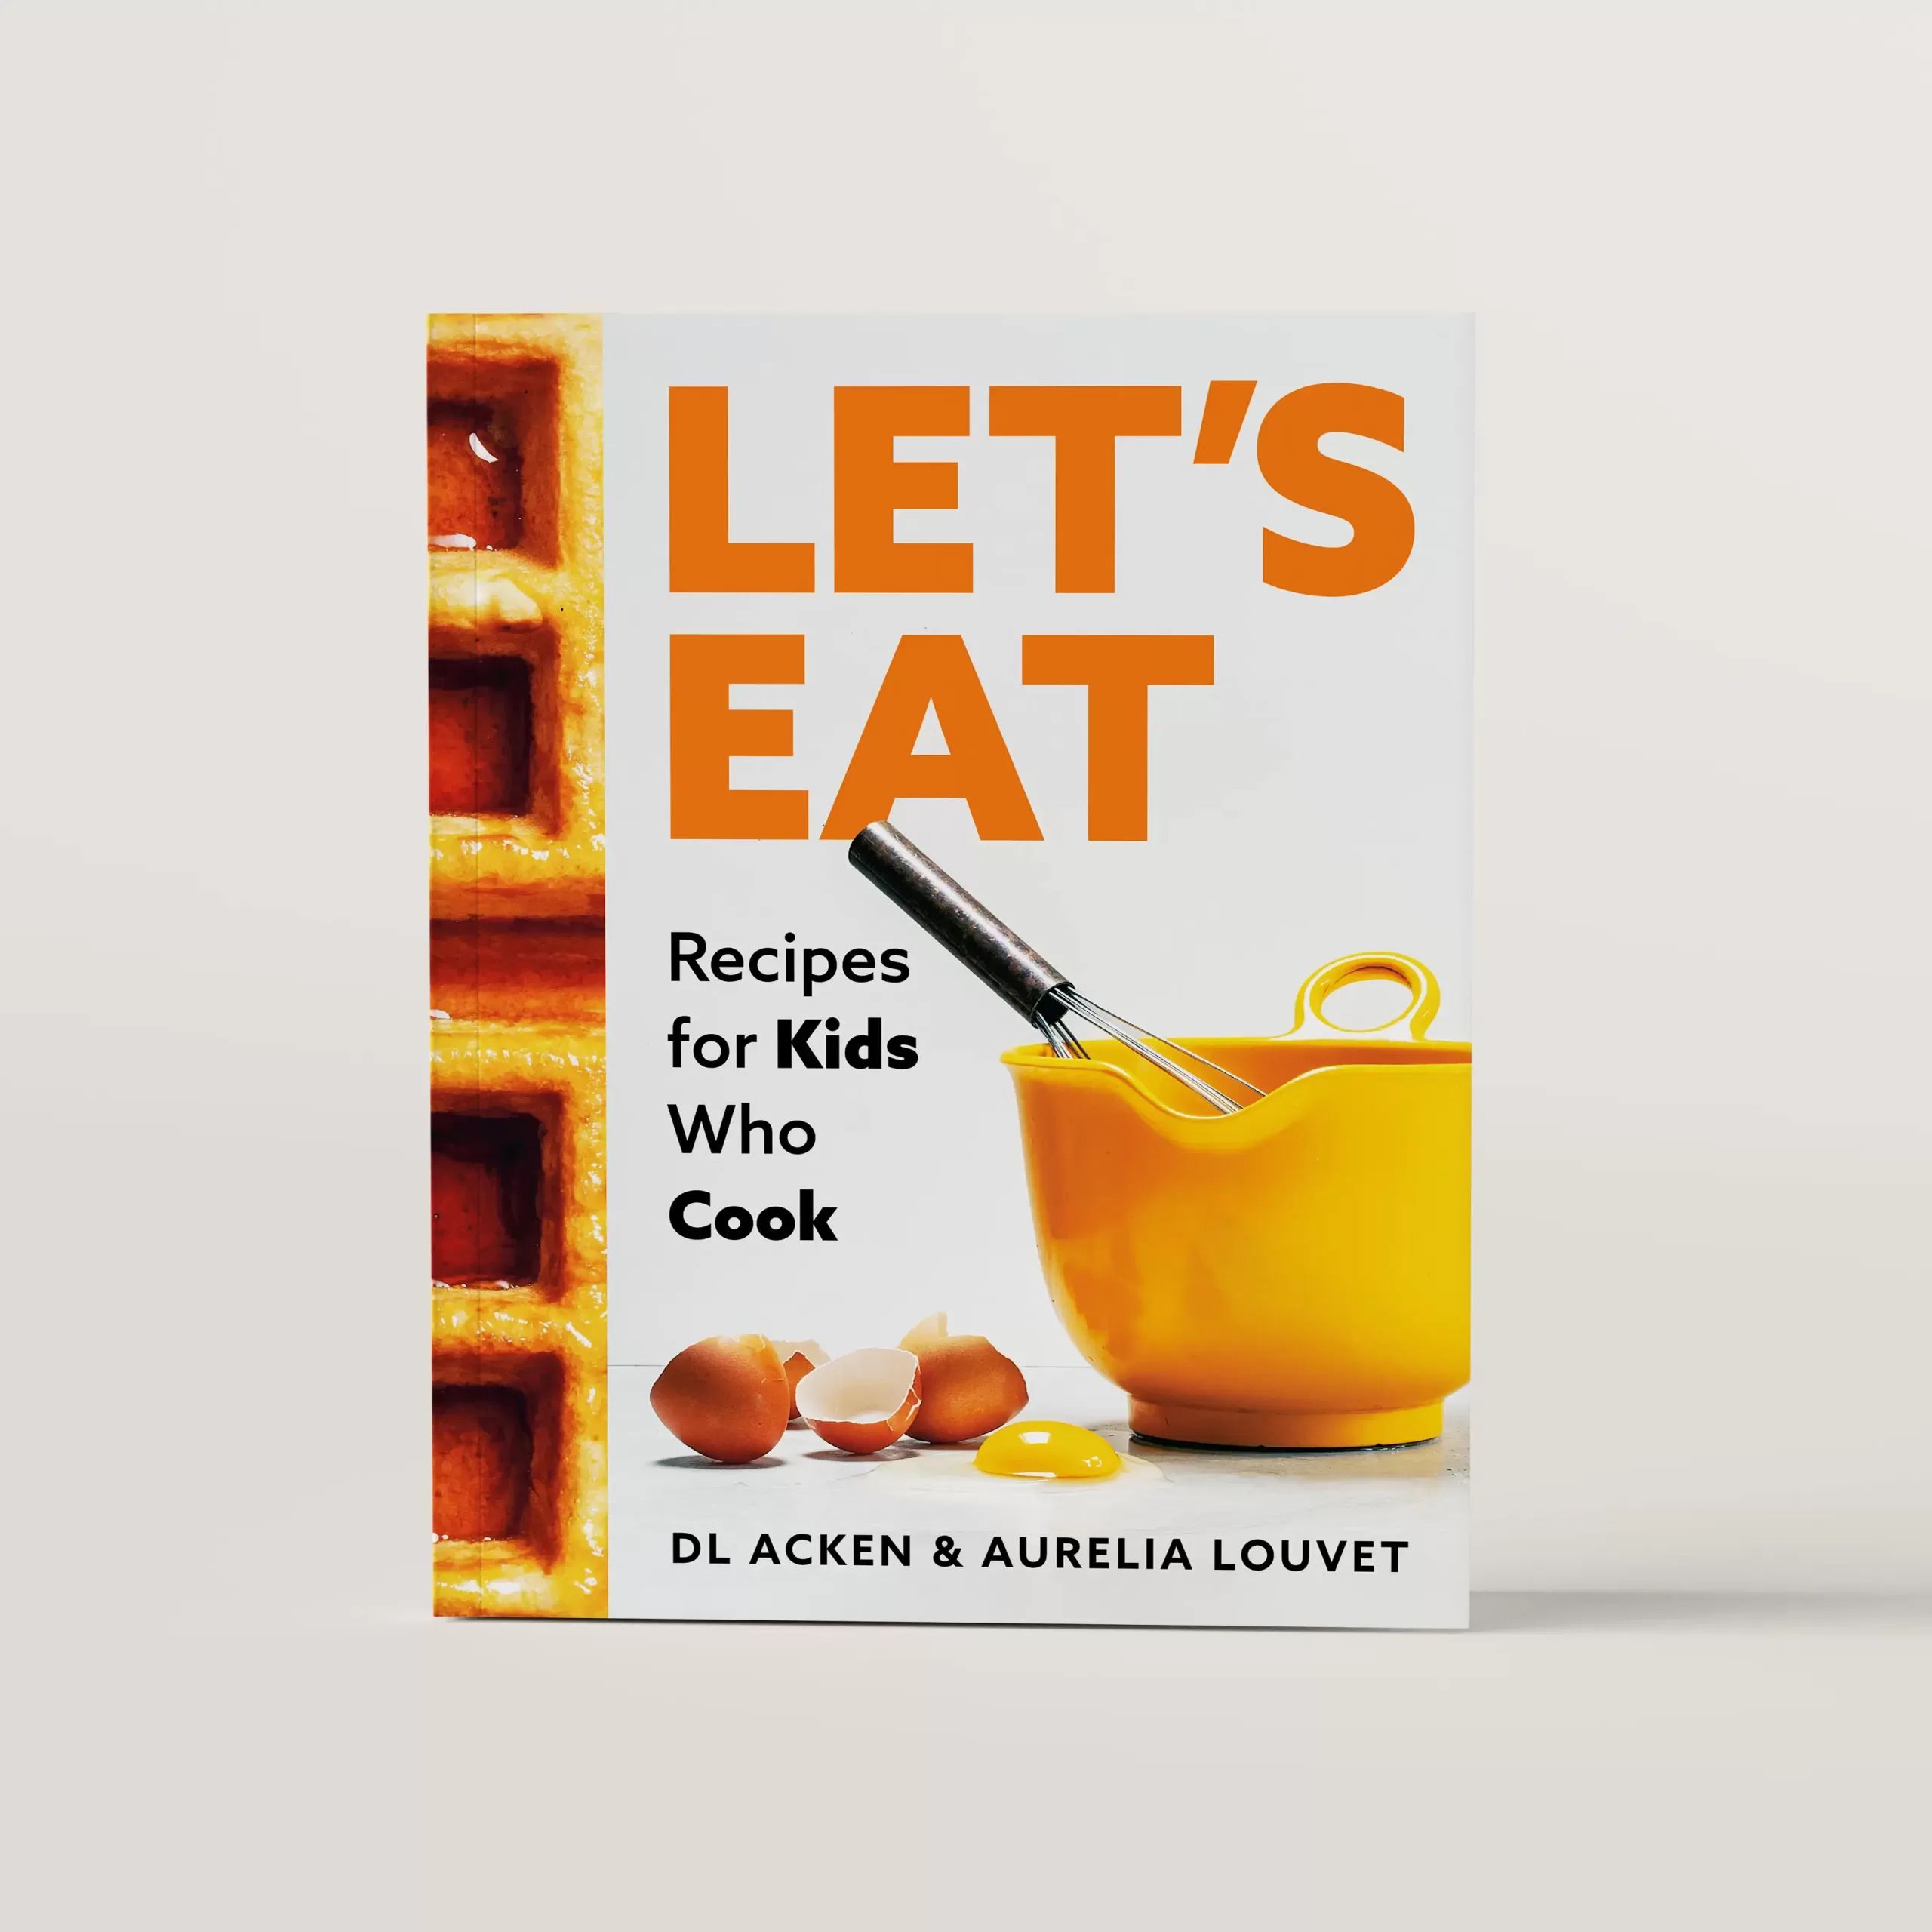 Let's Eat cookbook cover featuring a waffle photo that wraps around the spine. The main photo is of a bright yellow bowl with a whisk and cracked eggs beside it.